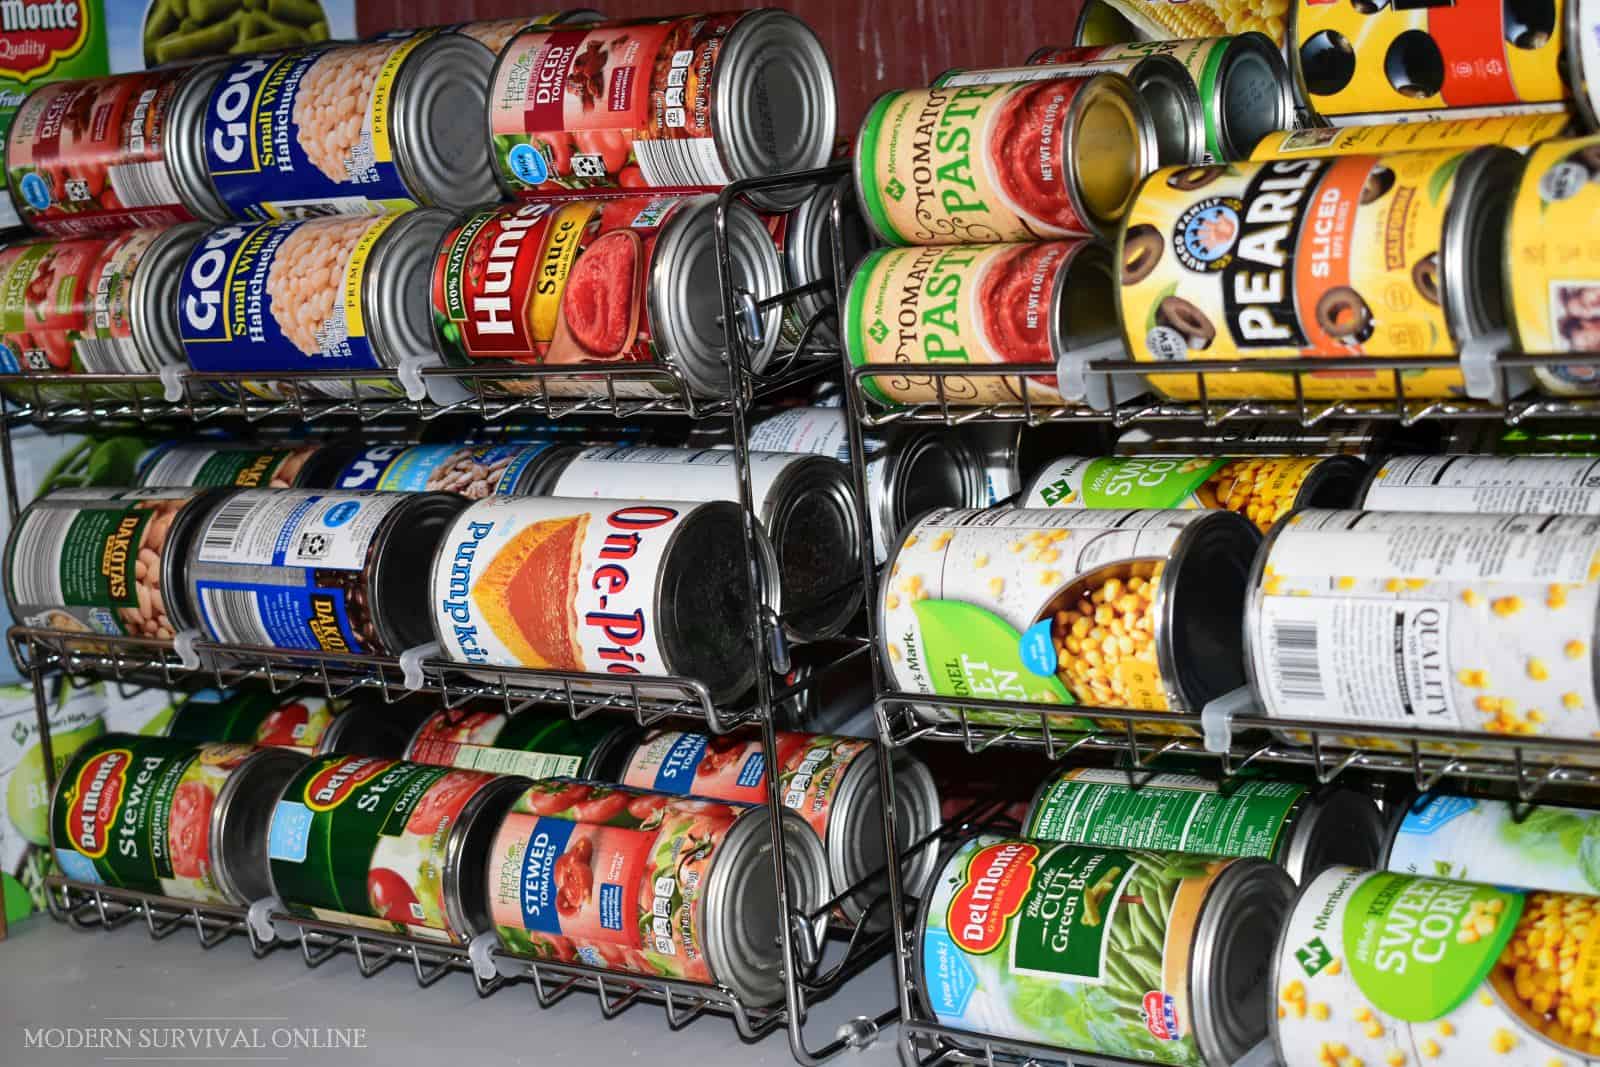 canned foods on can racks in pantry